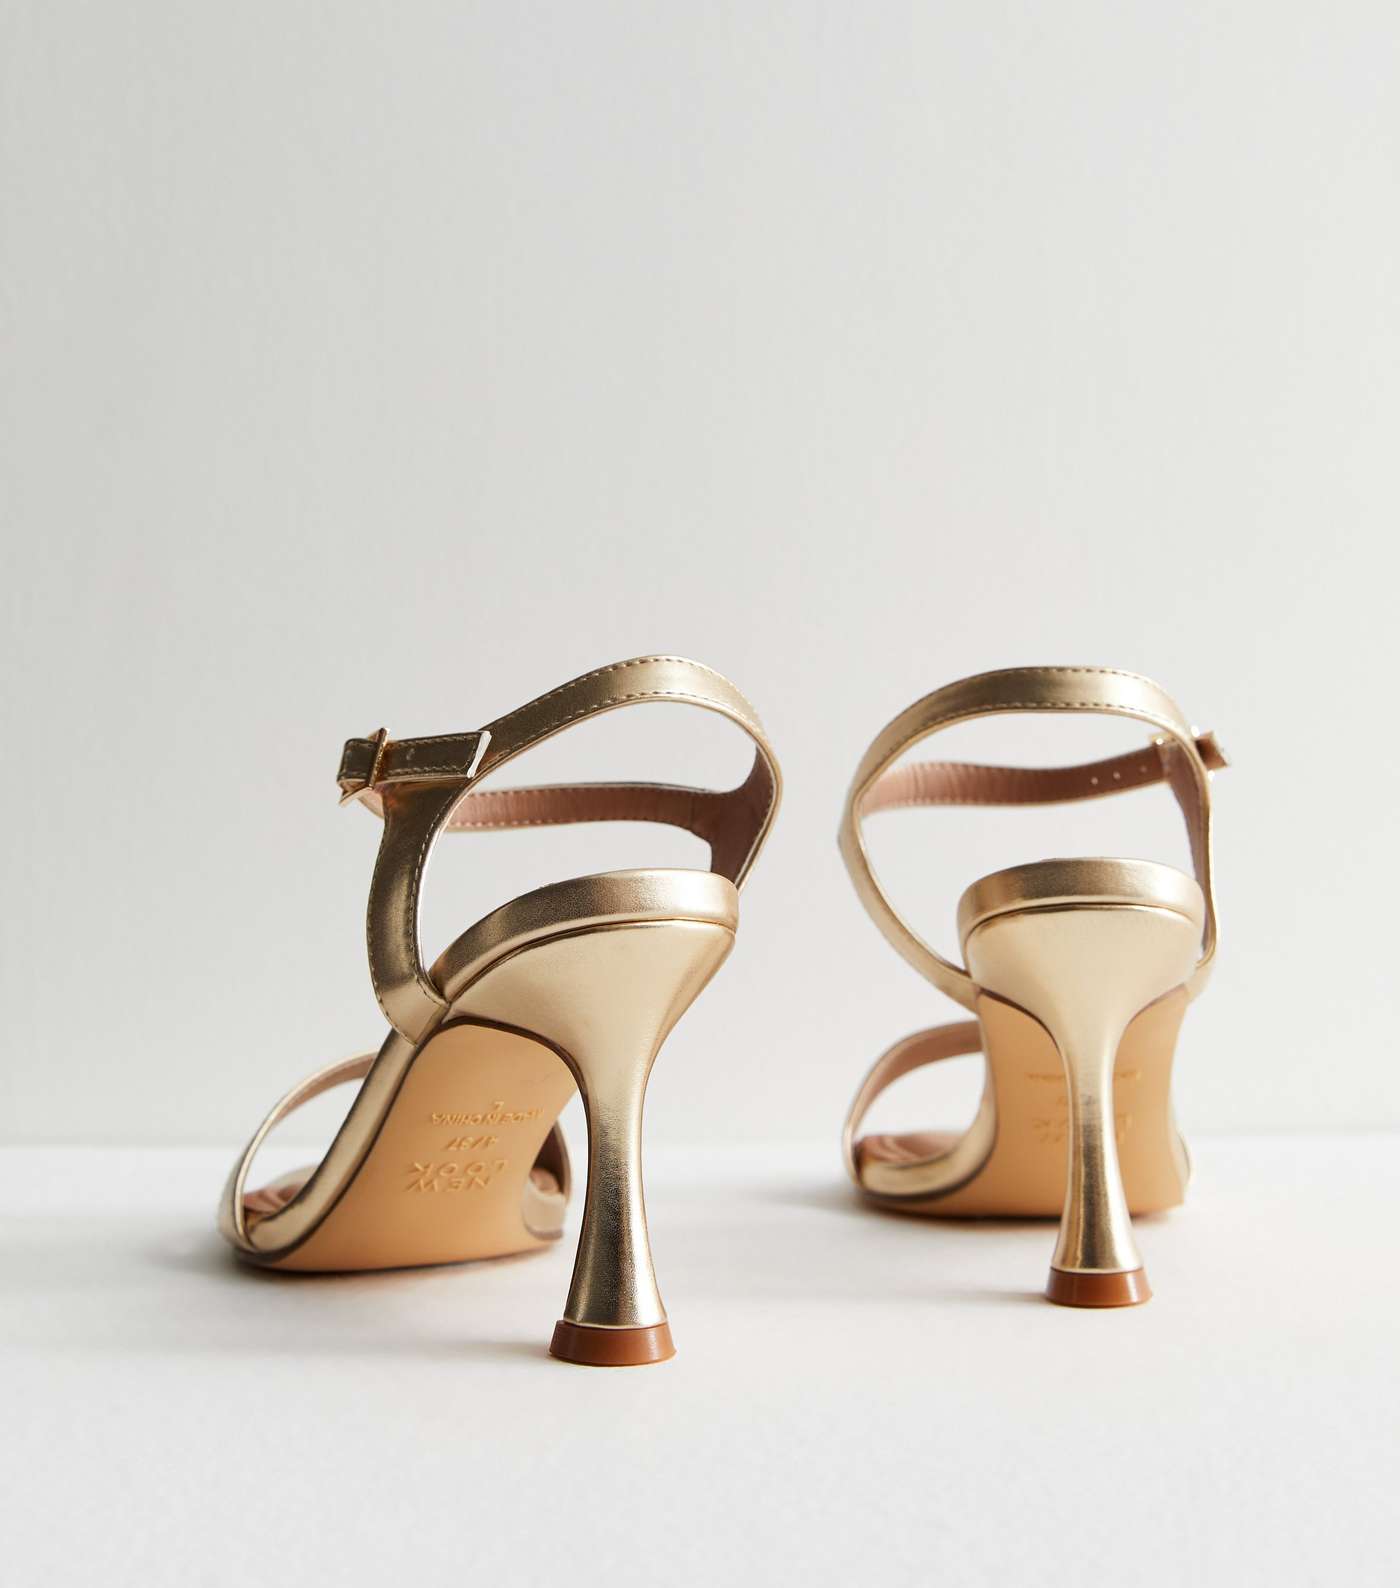 Gold Leather-Look 2 Part Stiletto Heel Sandals Image 4